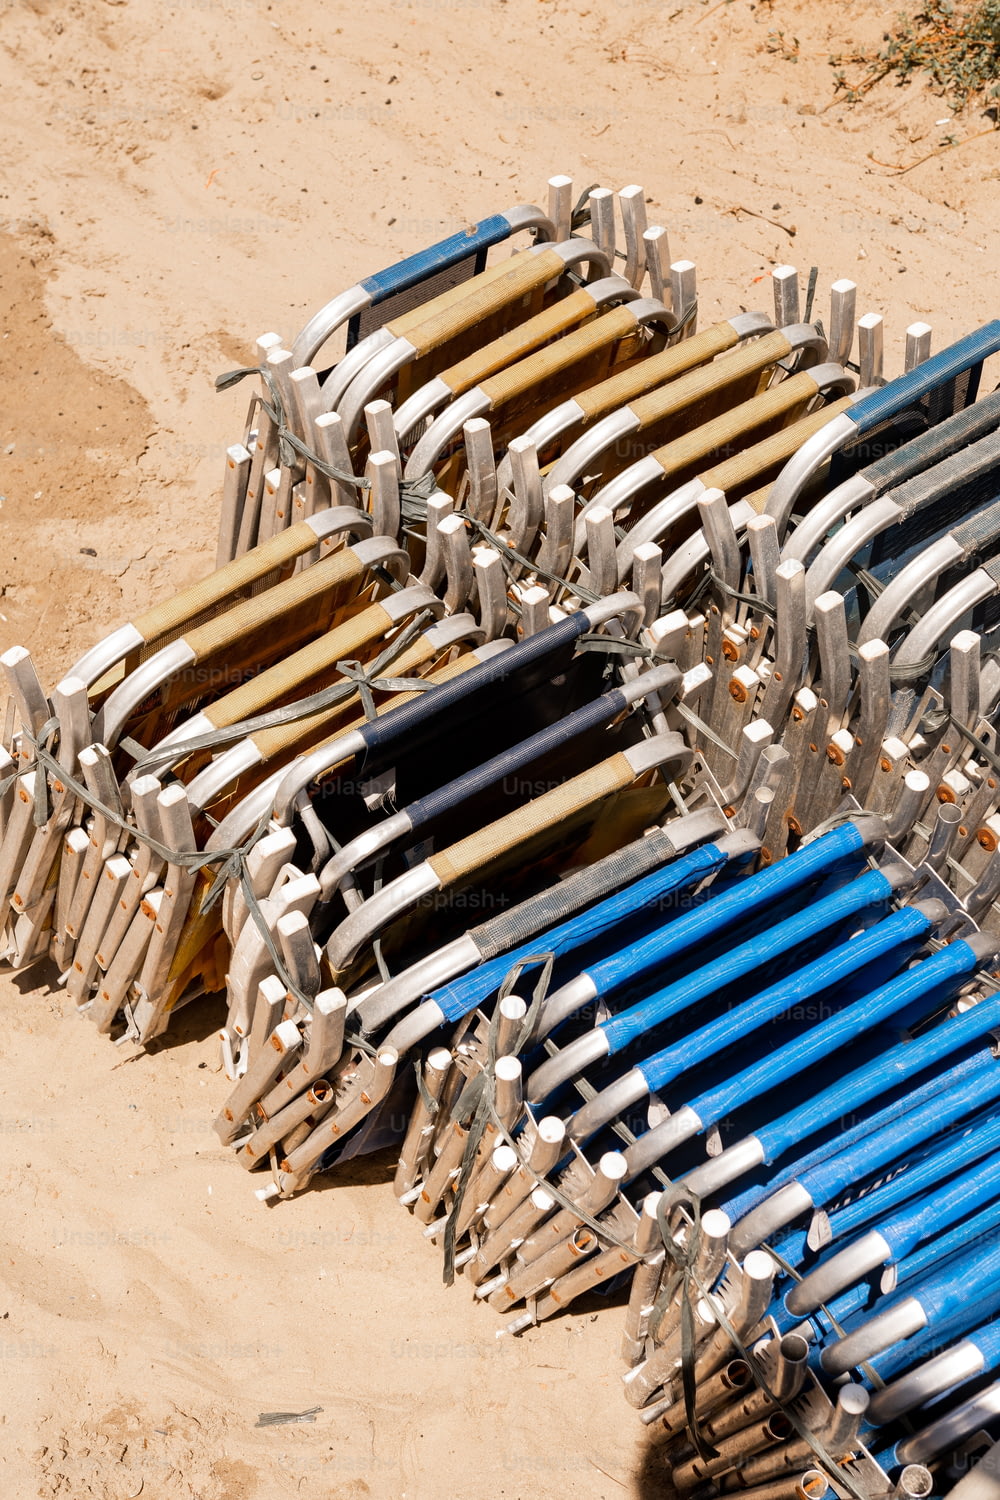 a bunch of chairs that are sitting in the sand